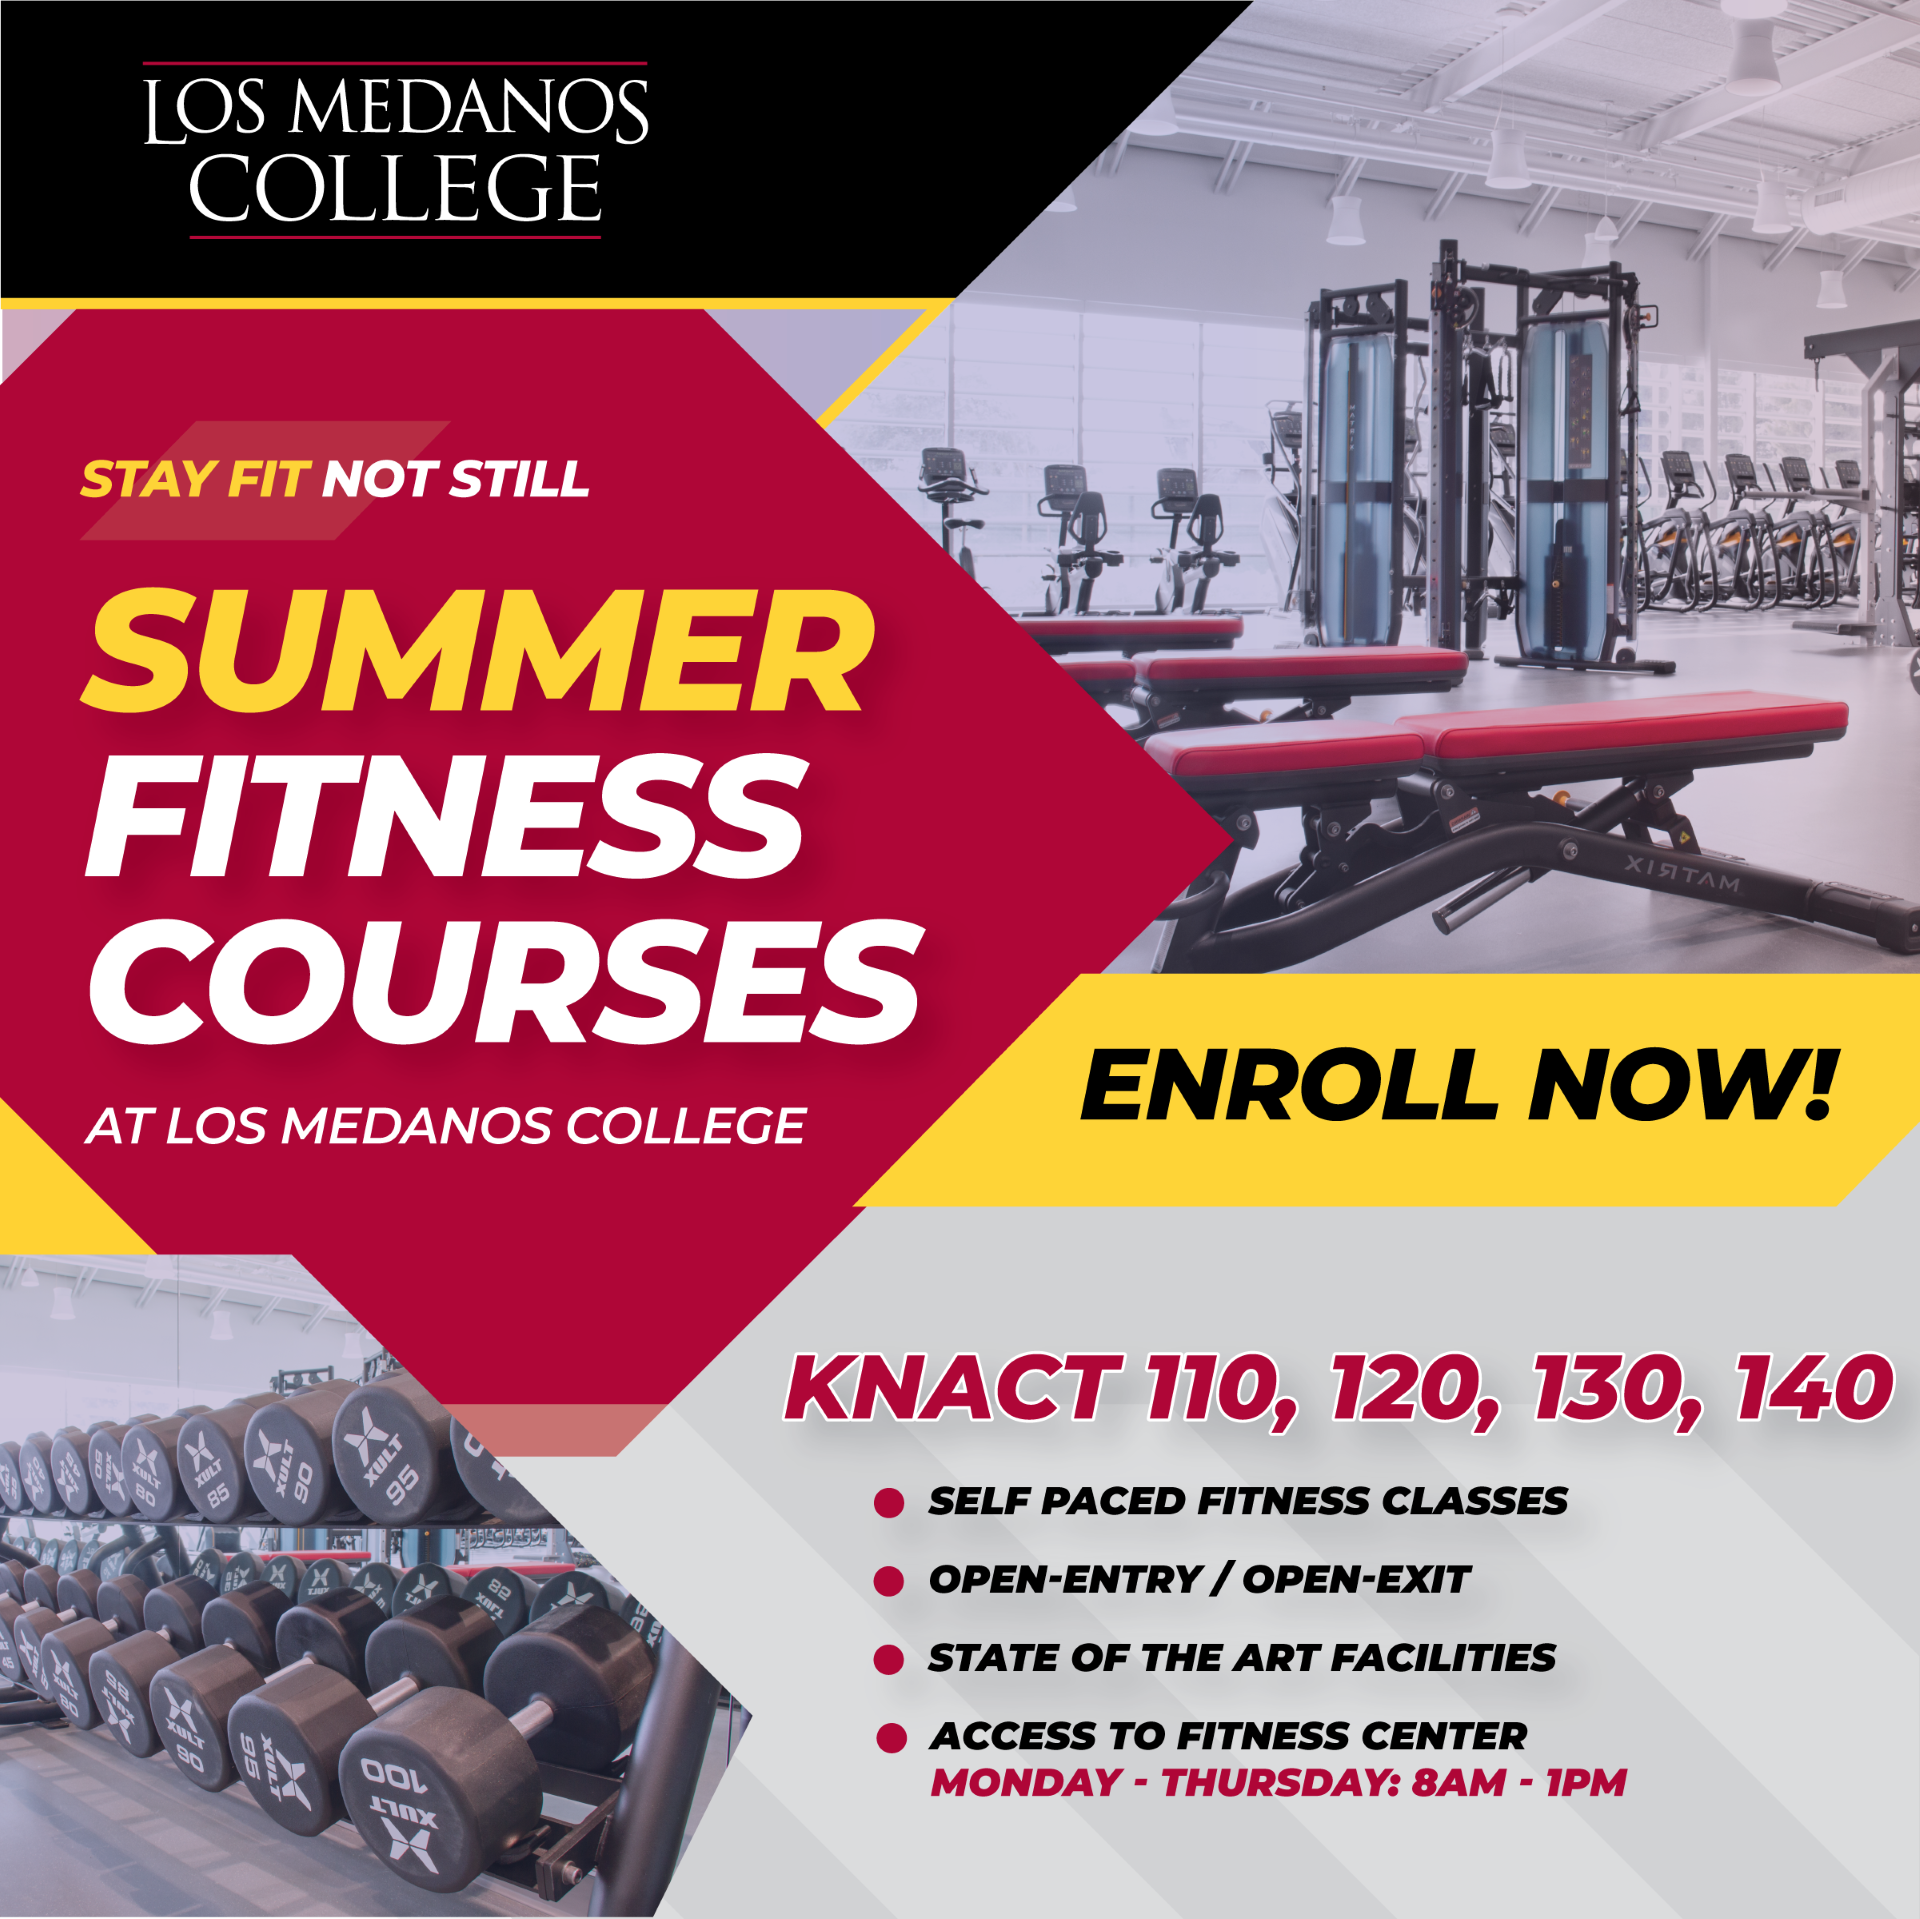 Fitness courses for summer - May 30